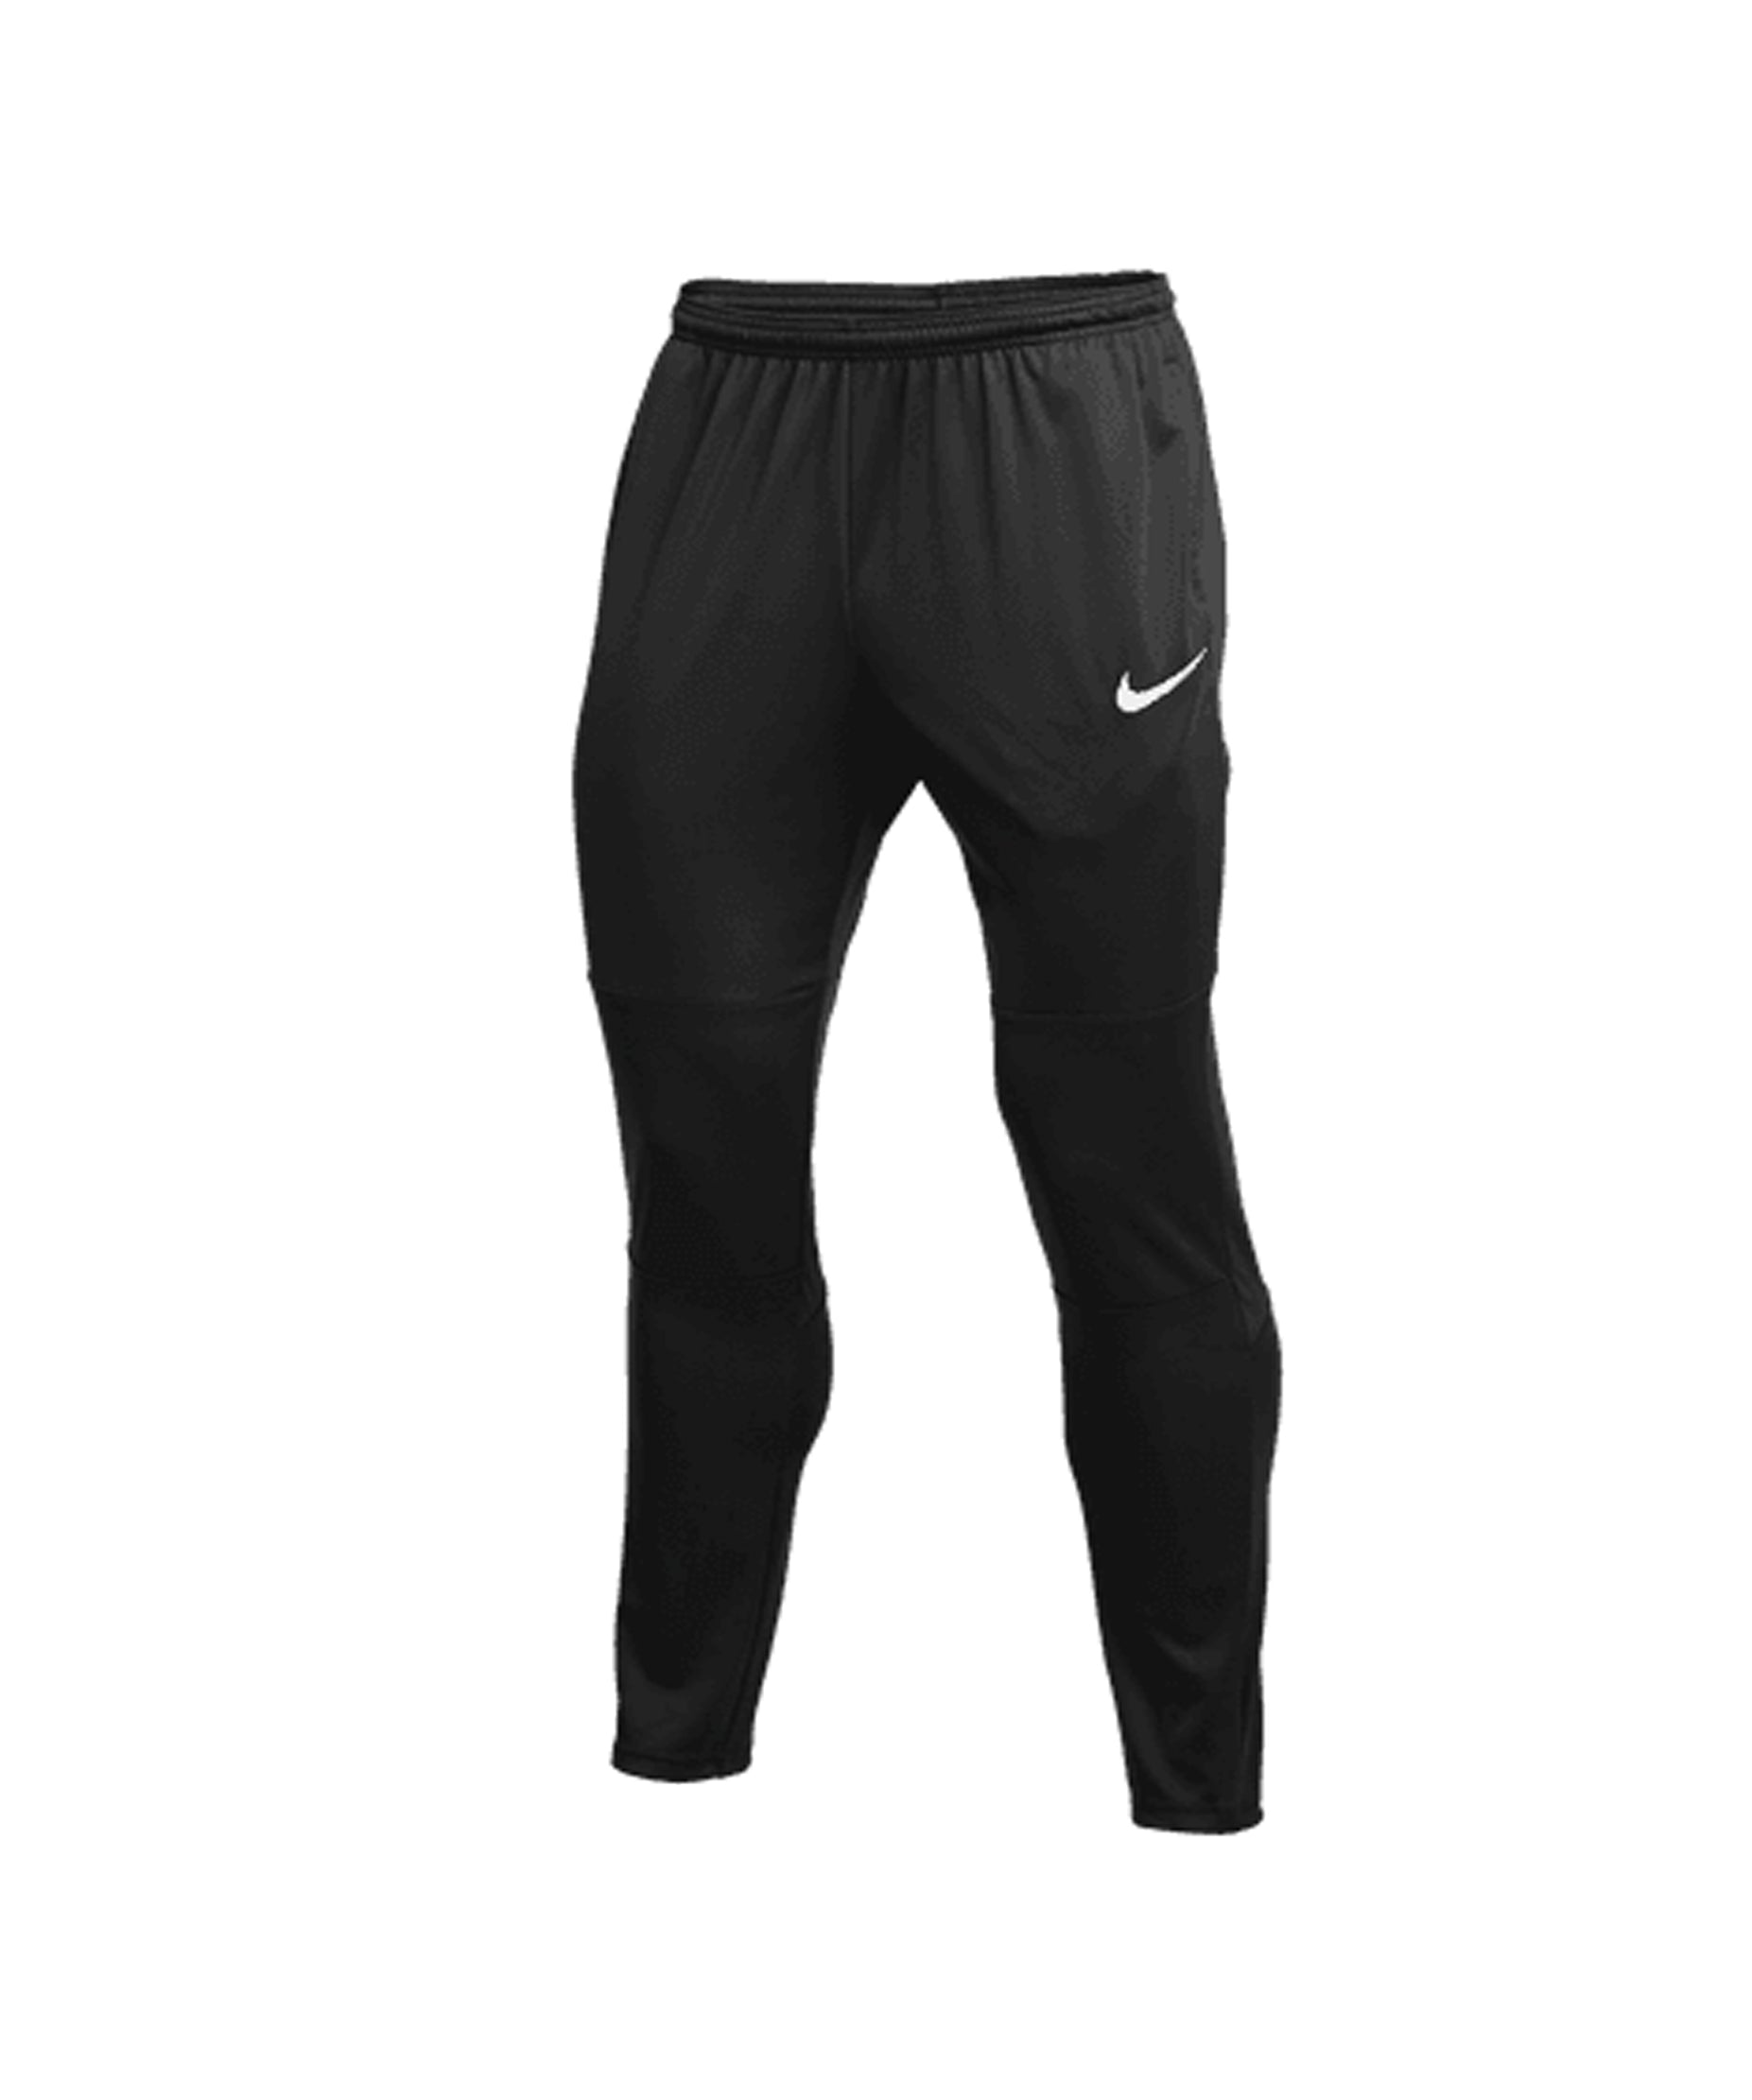 SENTINELS FC NIKE YOUTH AND ADULT WARM-UP PANT - BLACK